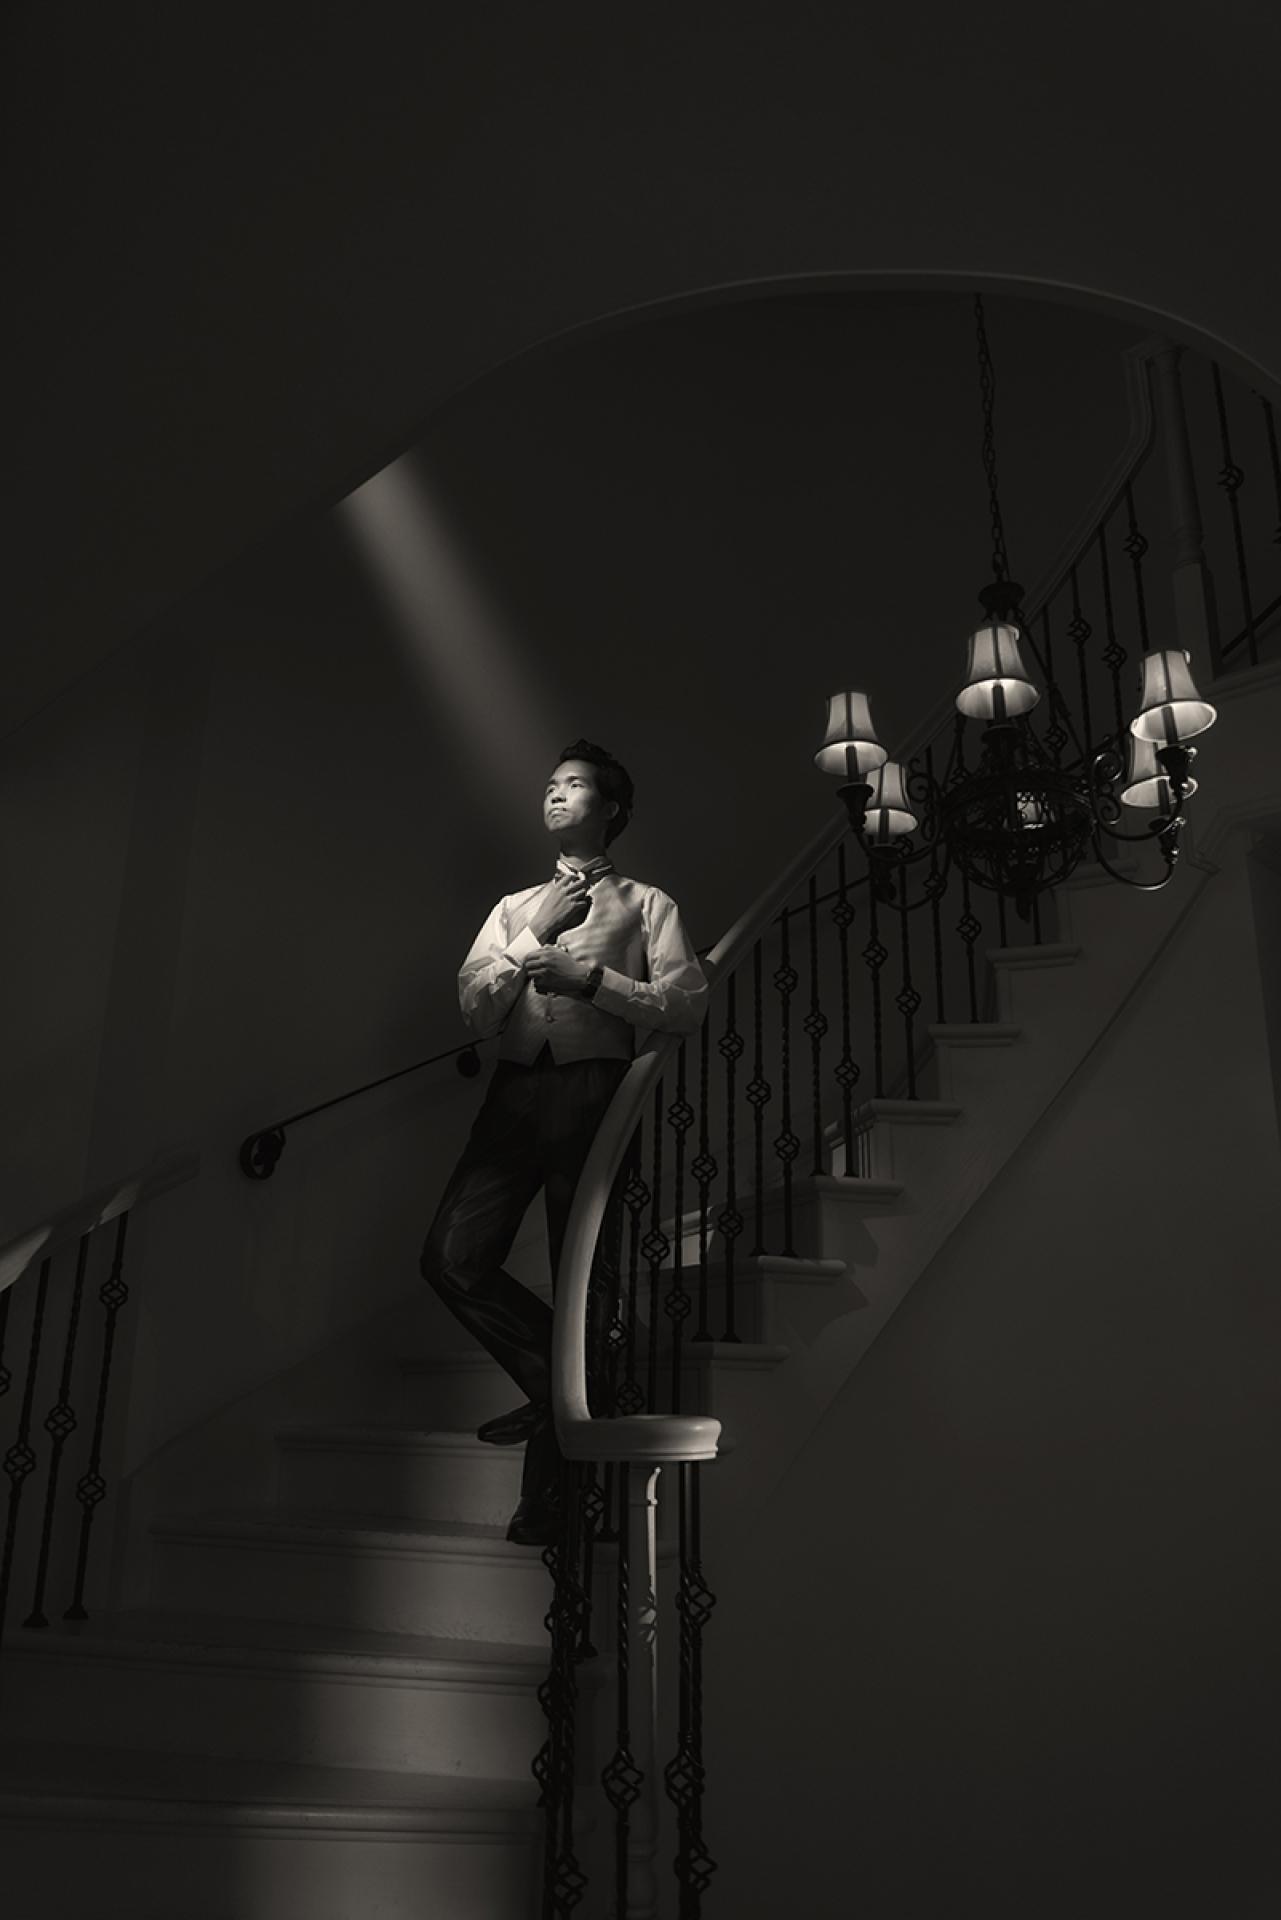 London Photography Awards Winner - Gentlemen and Spiral Staircase